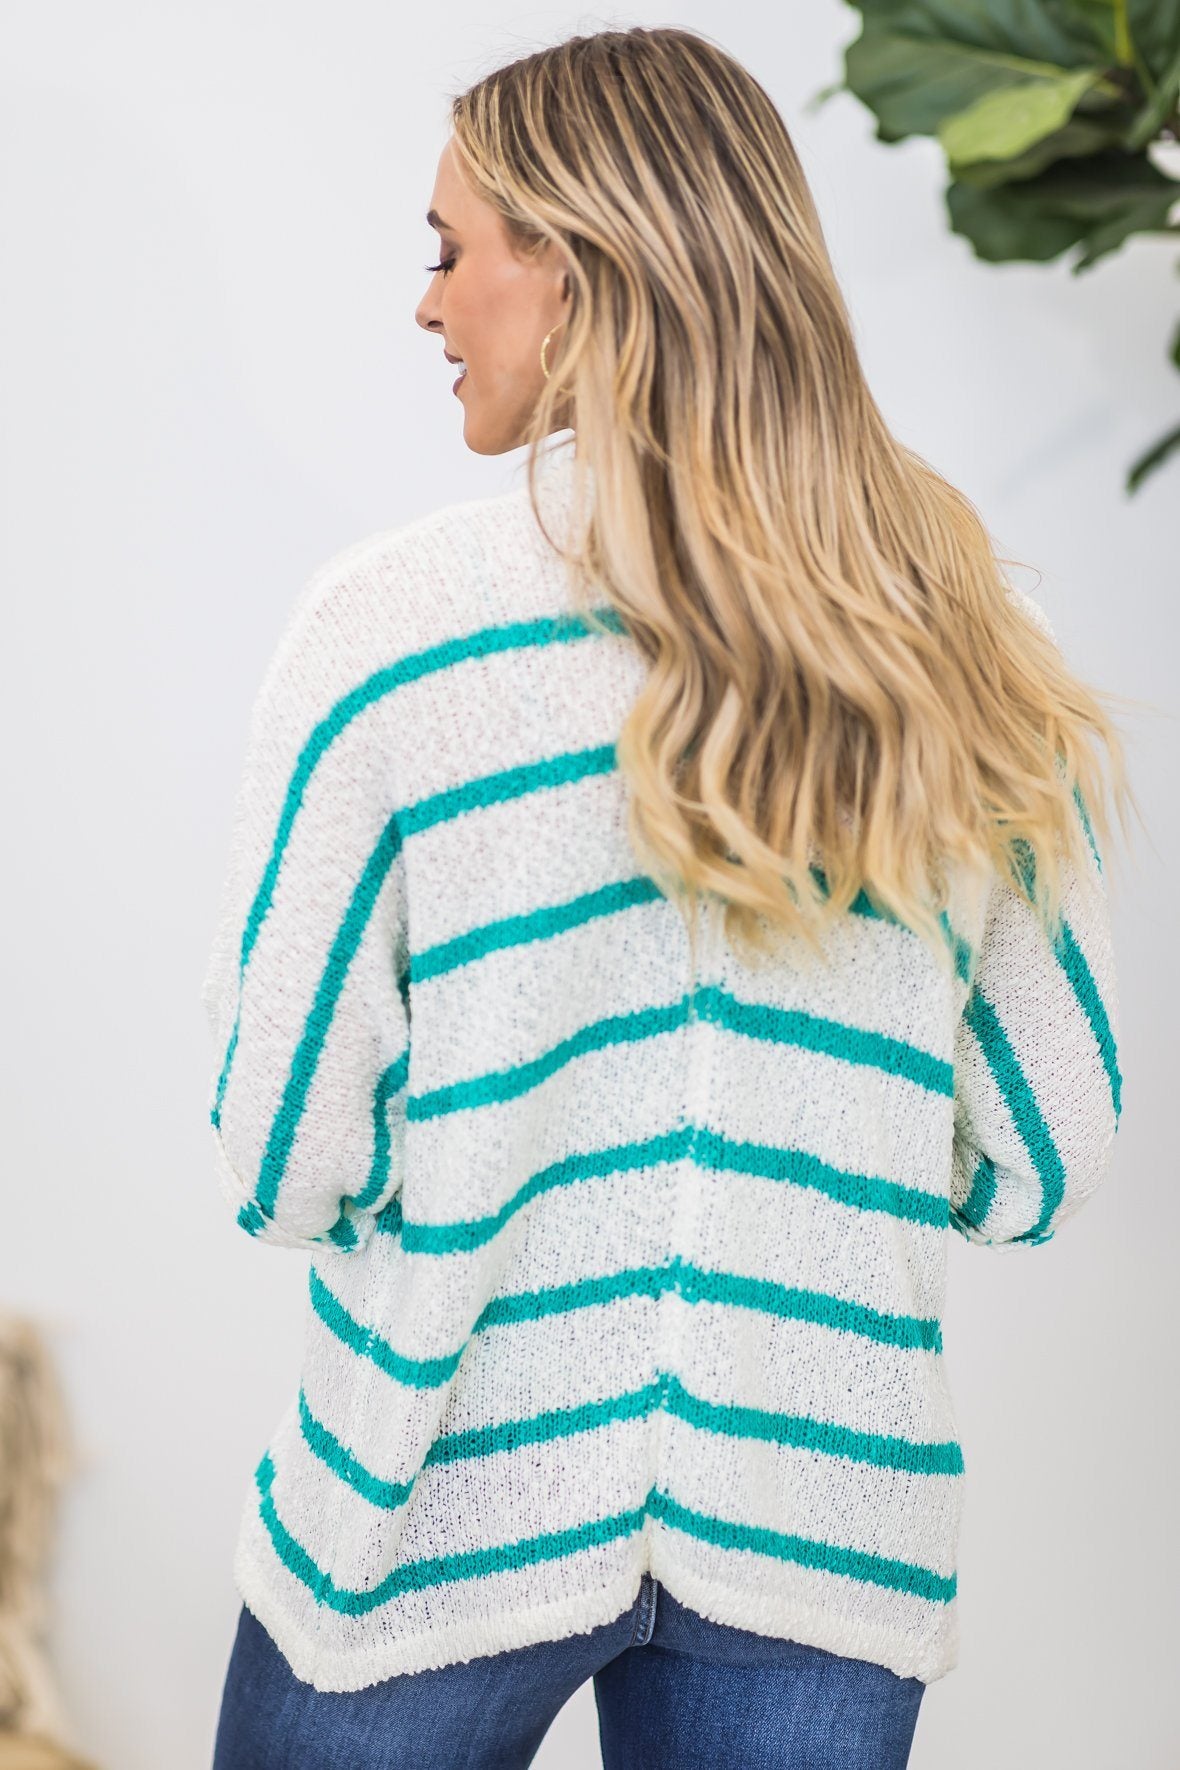 Ivory and Turquoise Striped Cardigan - Filly Flair